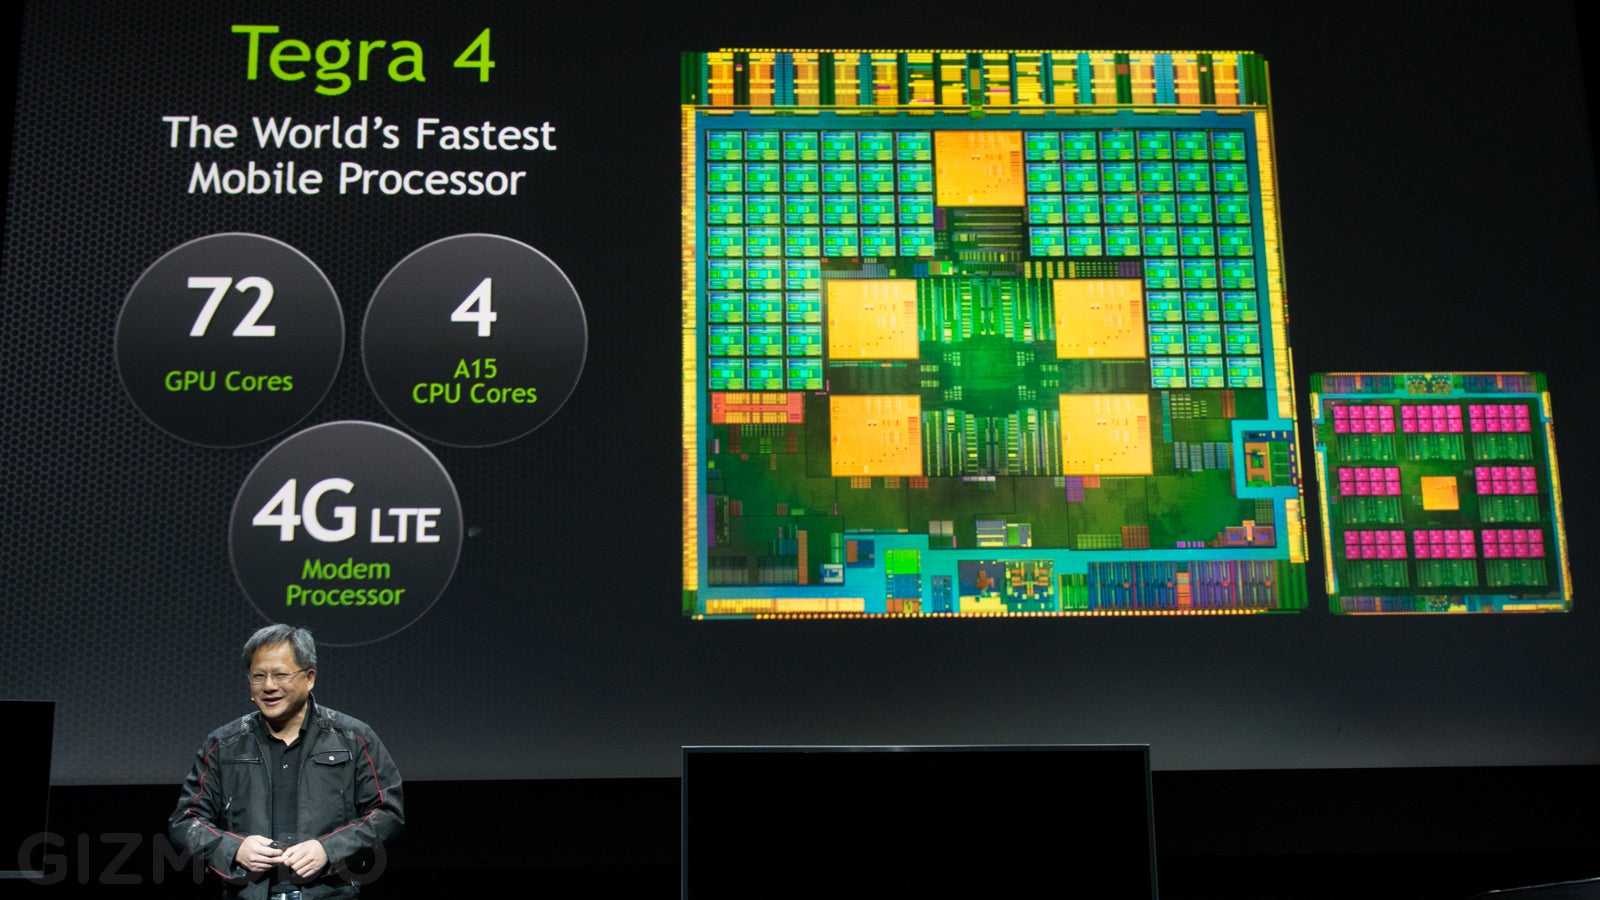 HP's Android flavored tablet is said to use a Tegra 4 processor - HP to build Android flavored tablet?